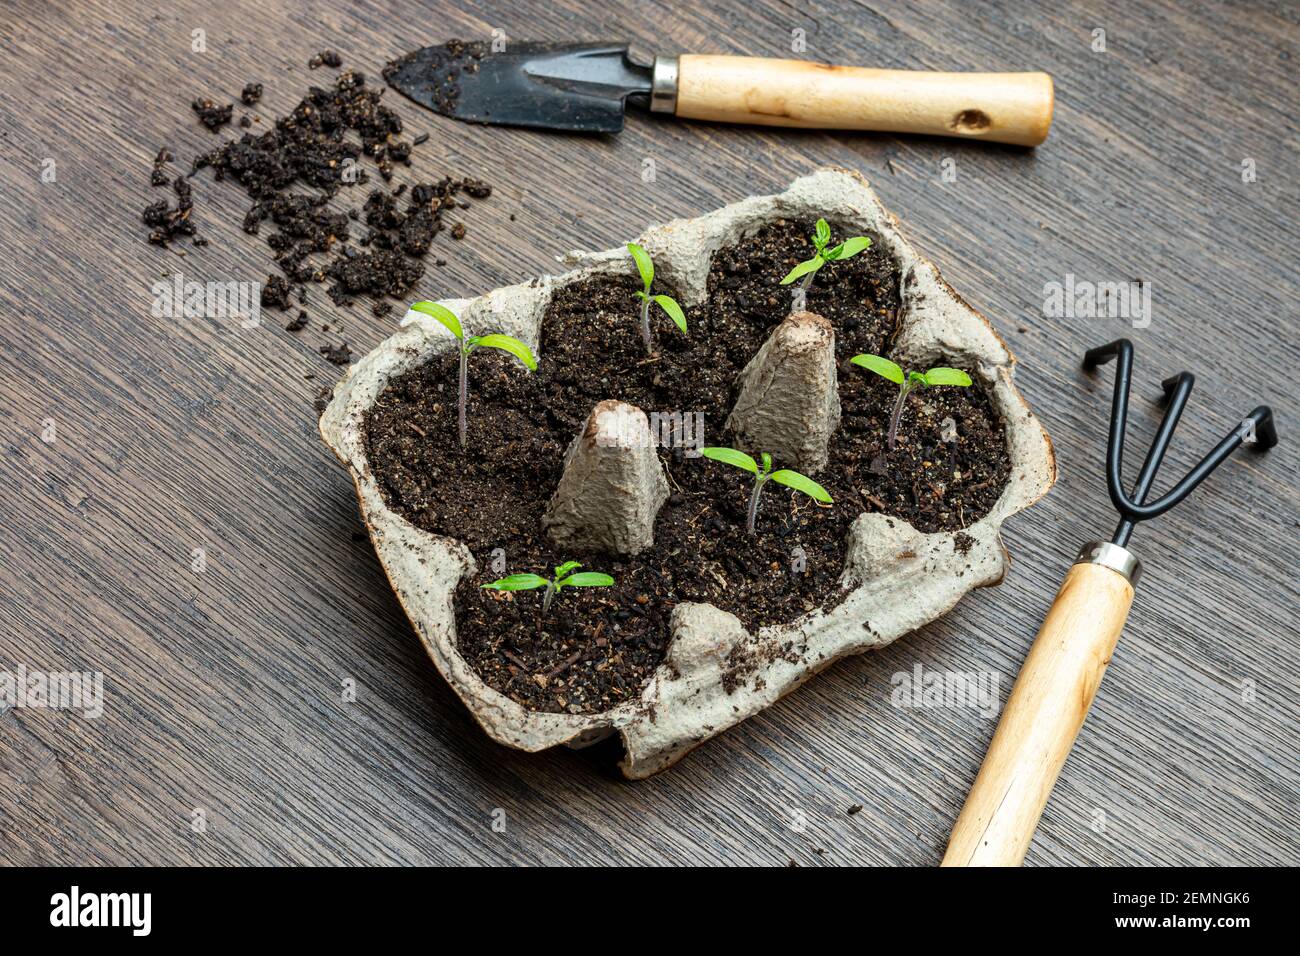 Tomato seedlings growing in reused egg box and gardening tools on wooden table, zero waste and organic gardening concept, top view Stock Photo